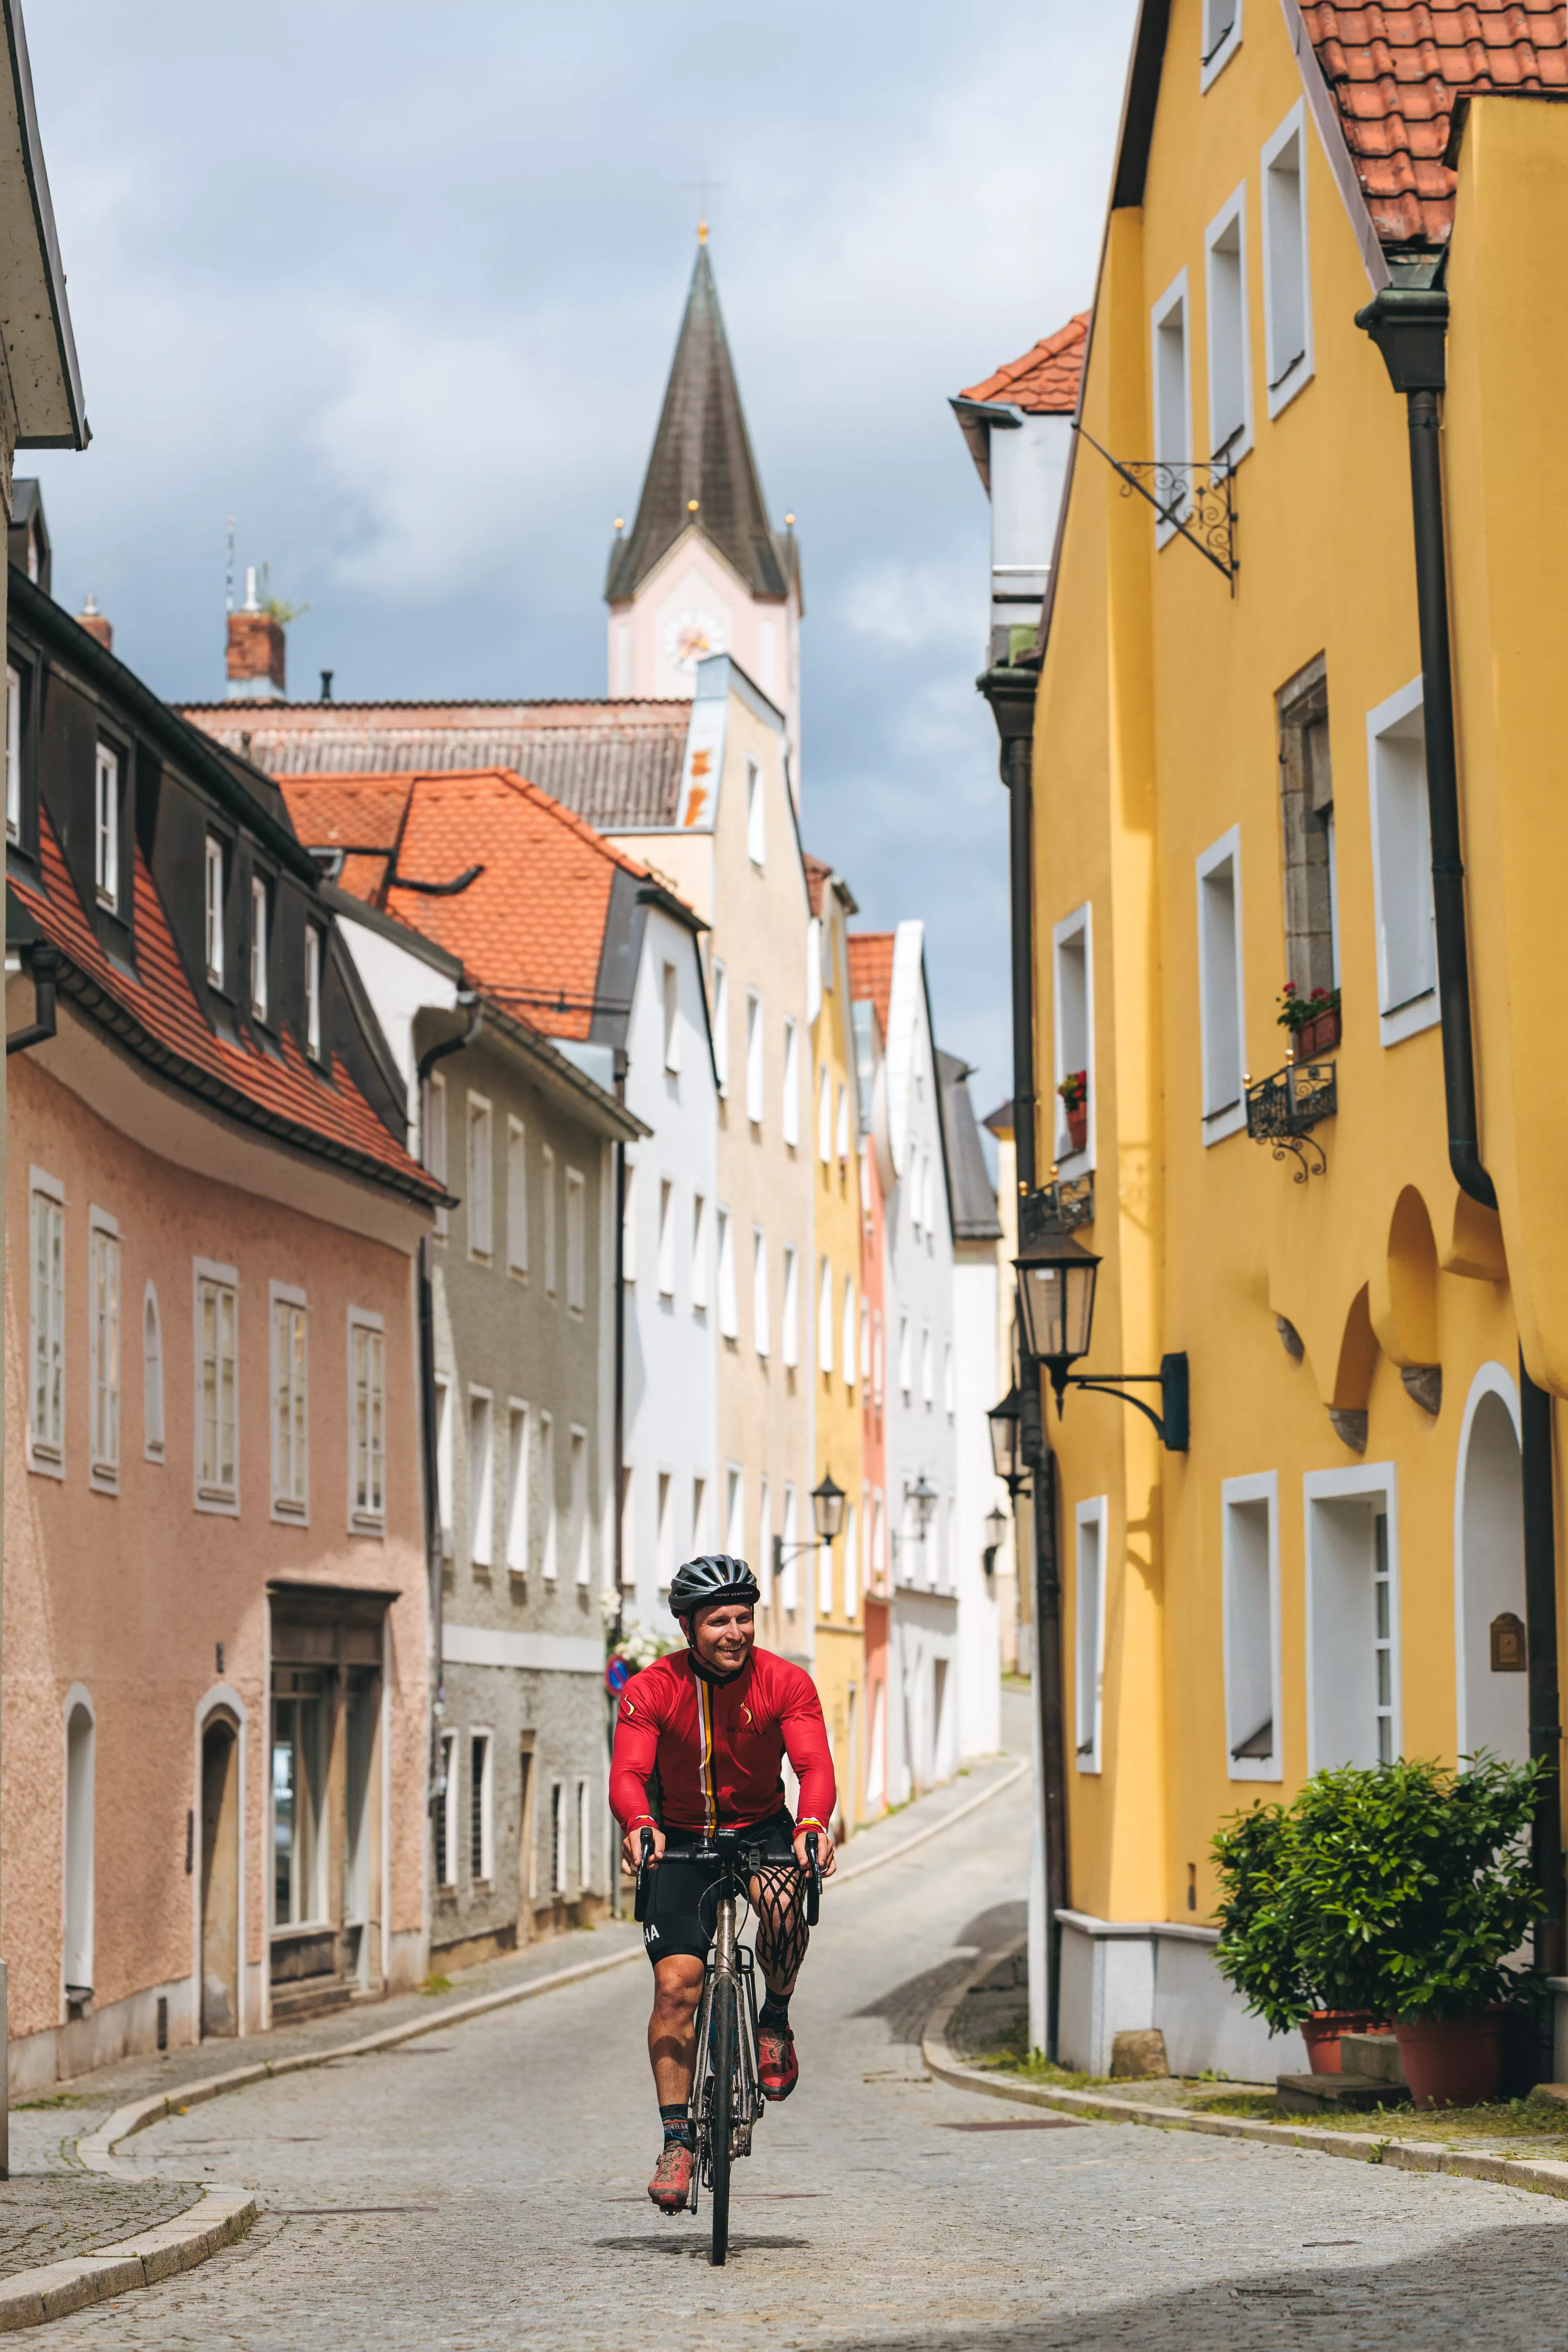 Man in red riding a bicycle in an alley of a European town